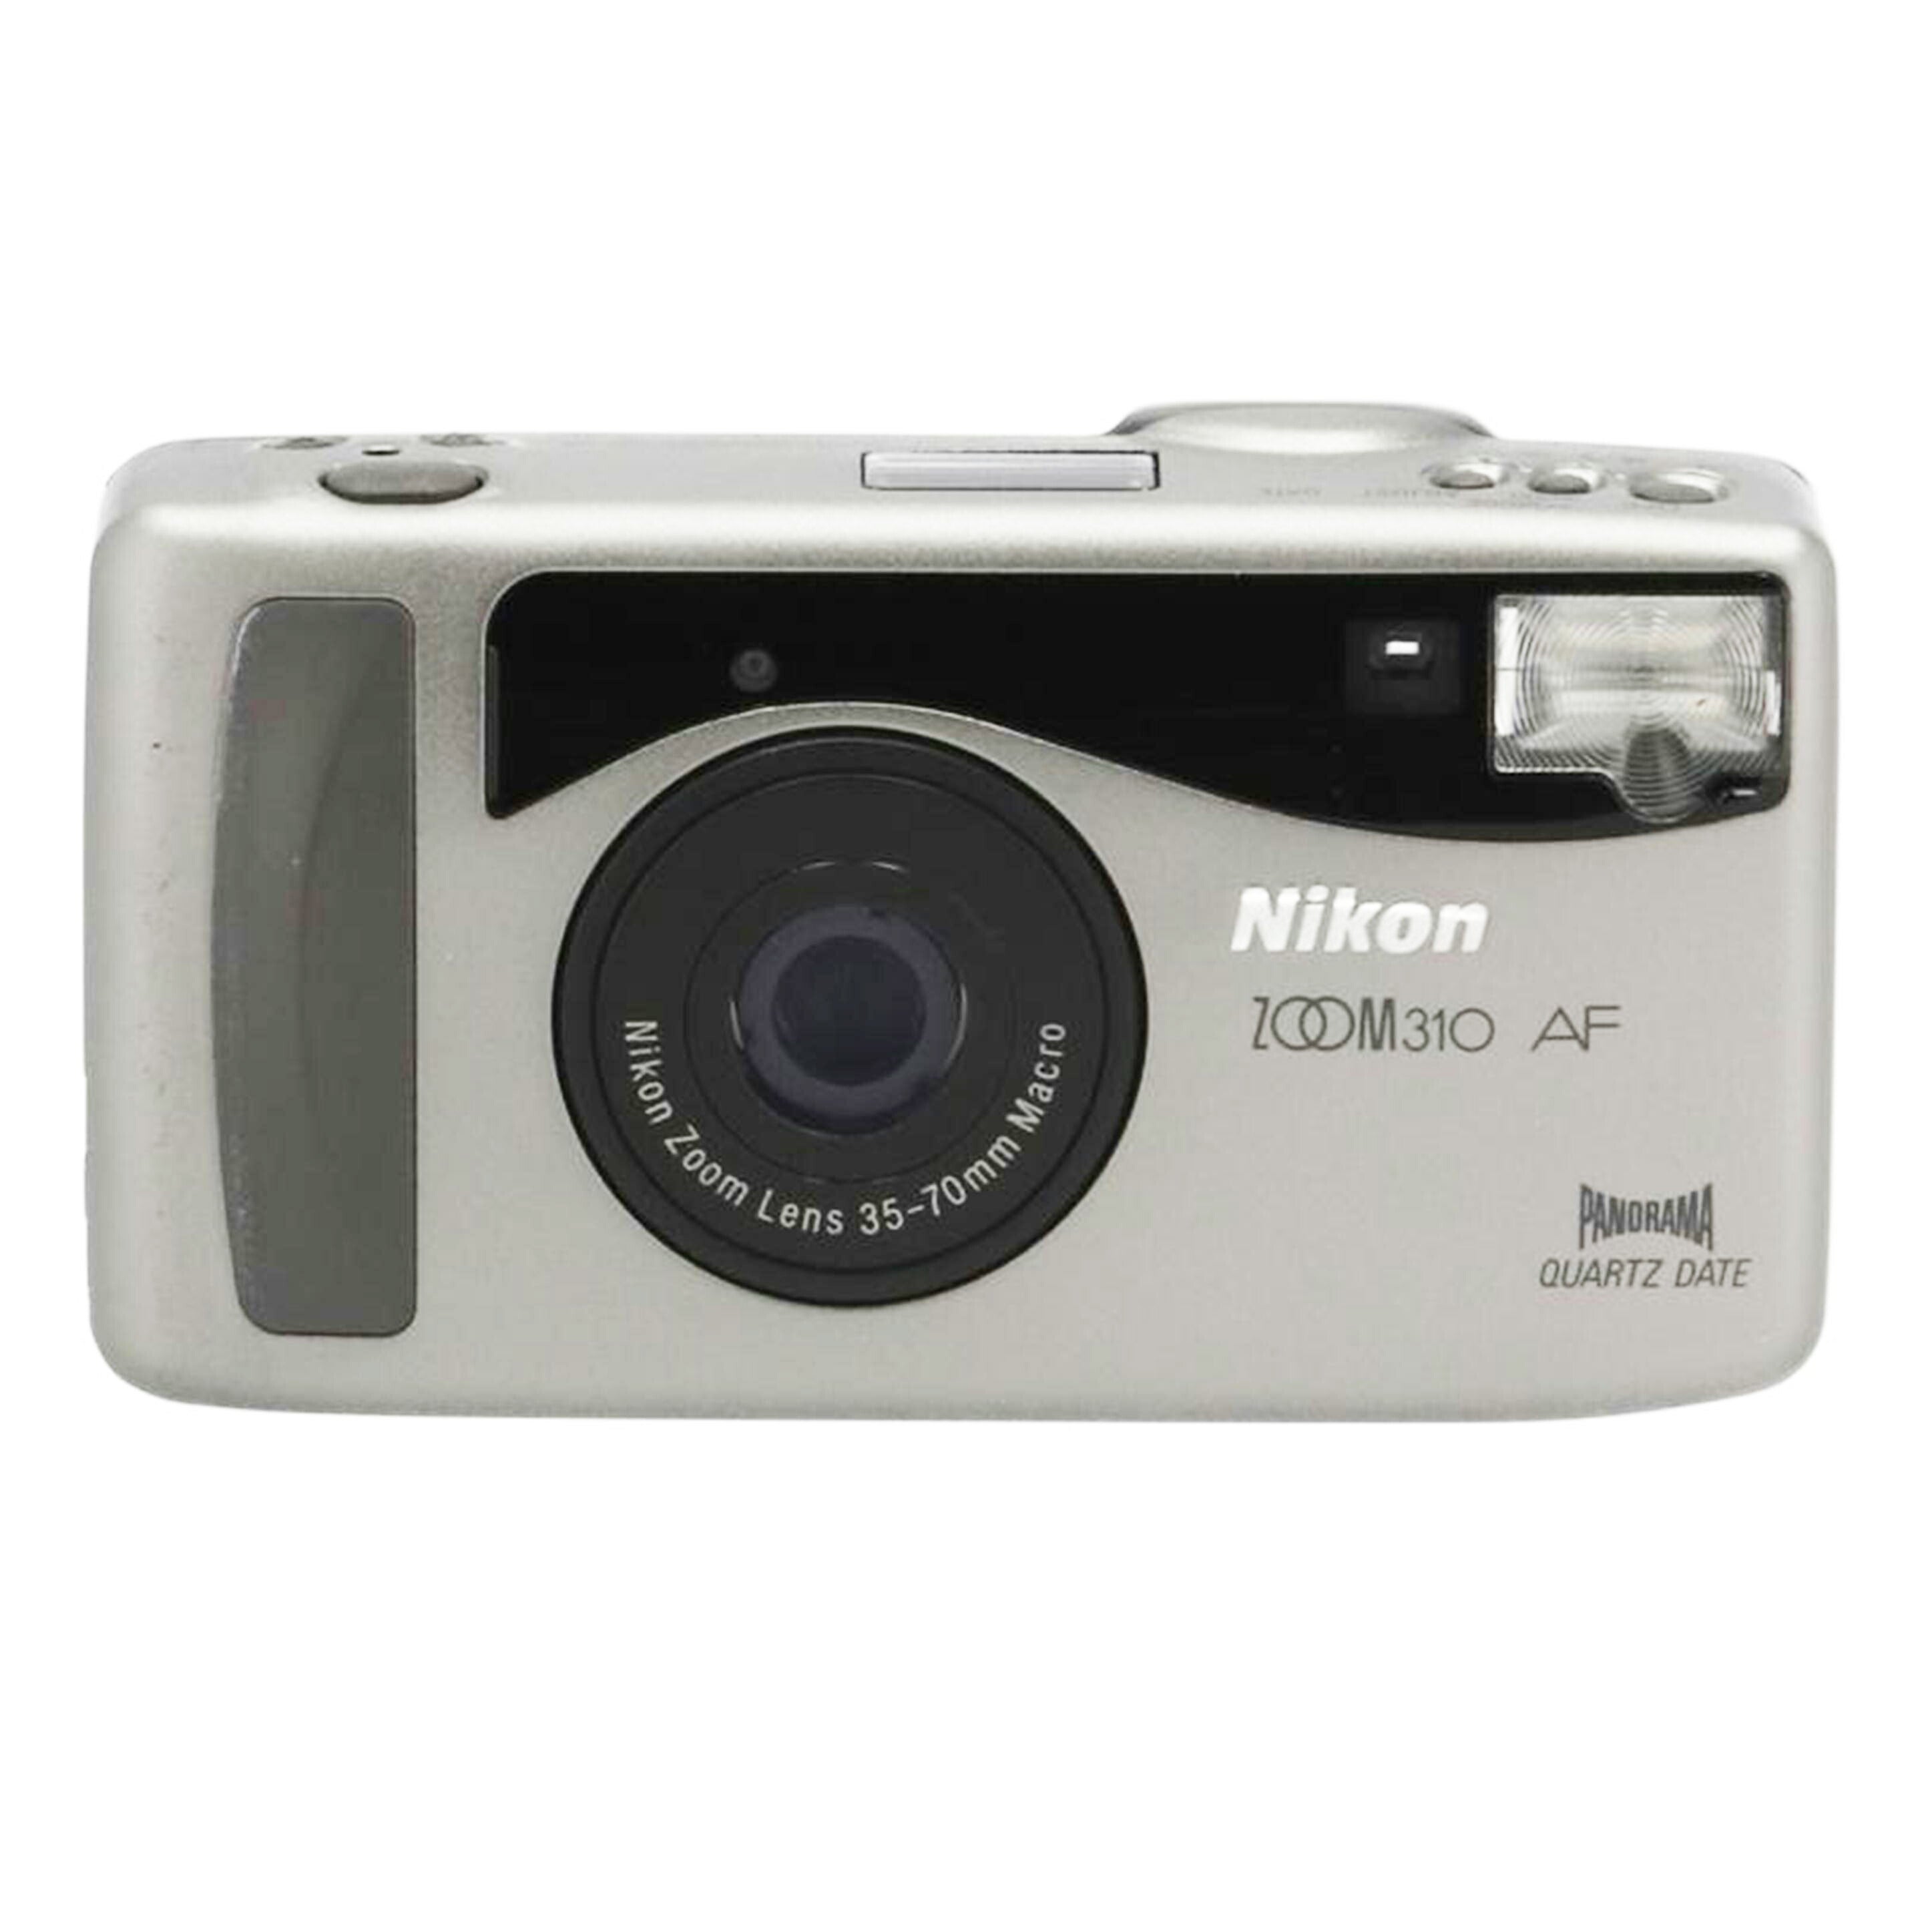 Nikon ニコン/コンパクトフィルムカメラ/ZOOM 310 AF//4108145/Bランク/84